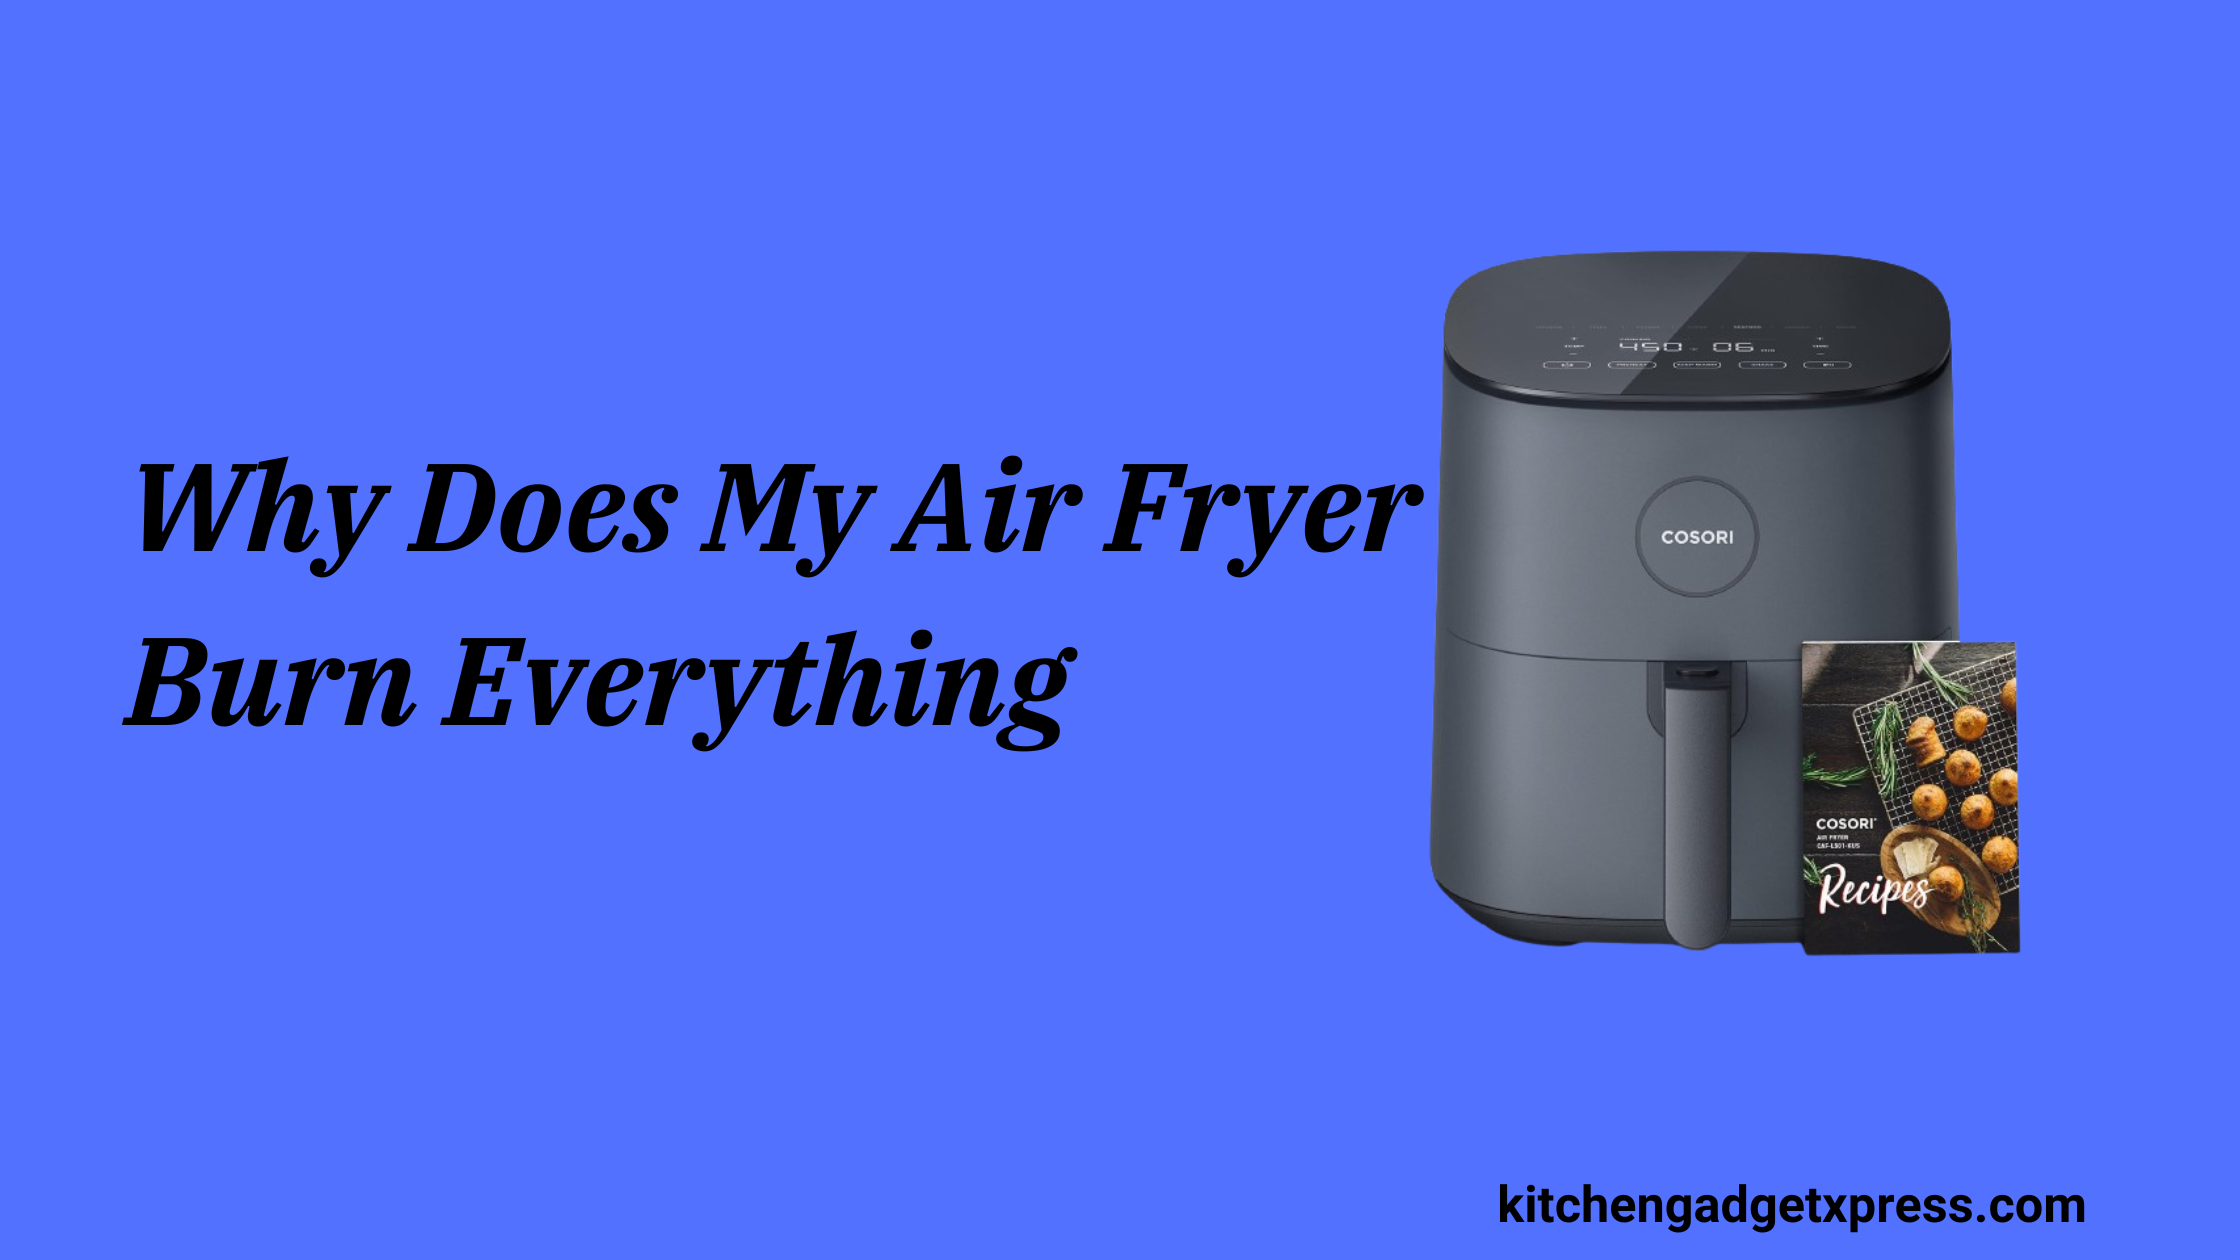 Why Does My Air Fryer Burn Everything